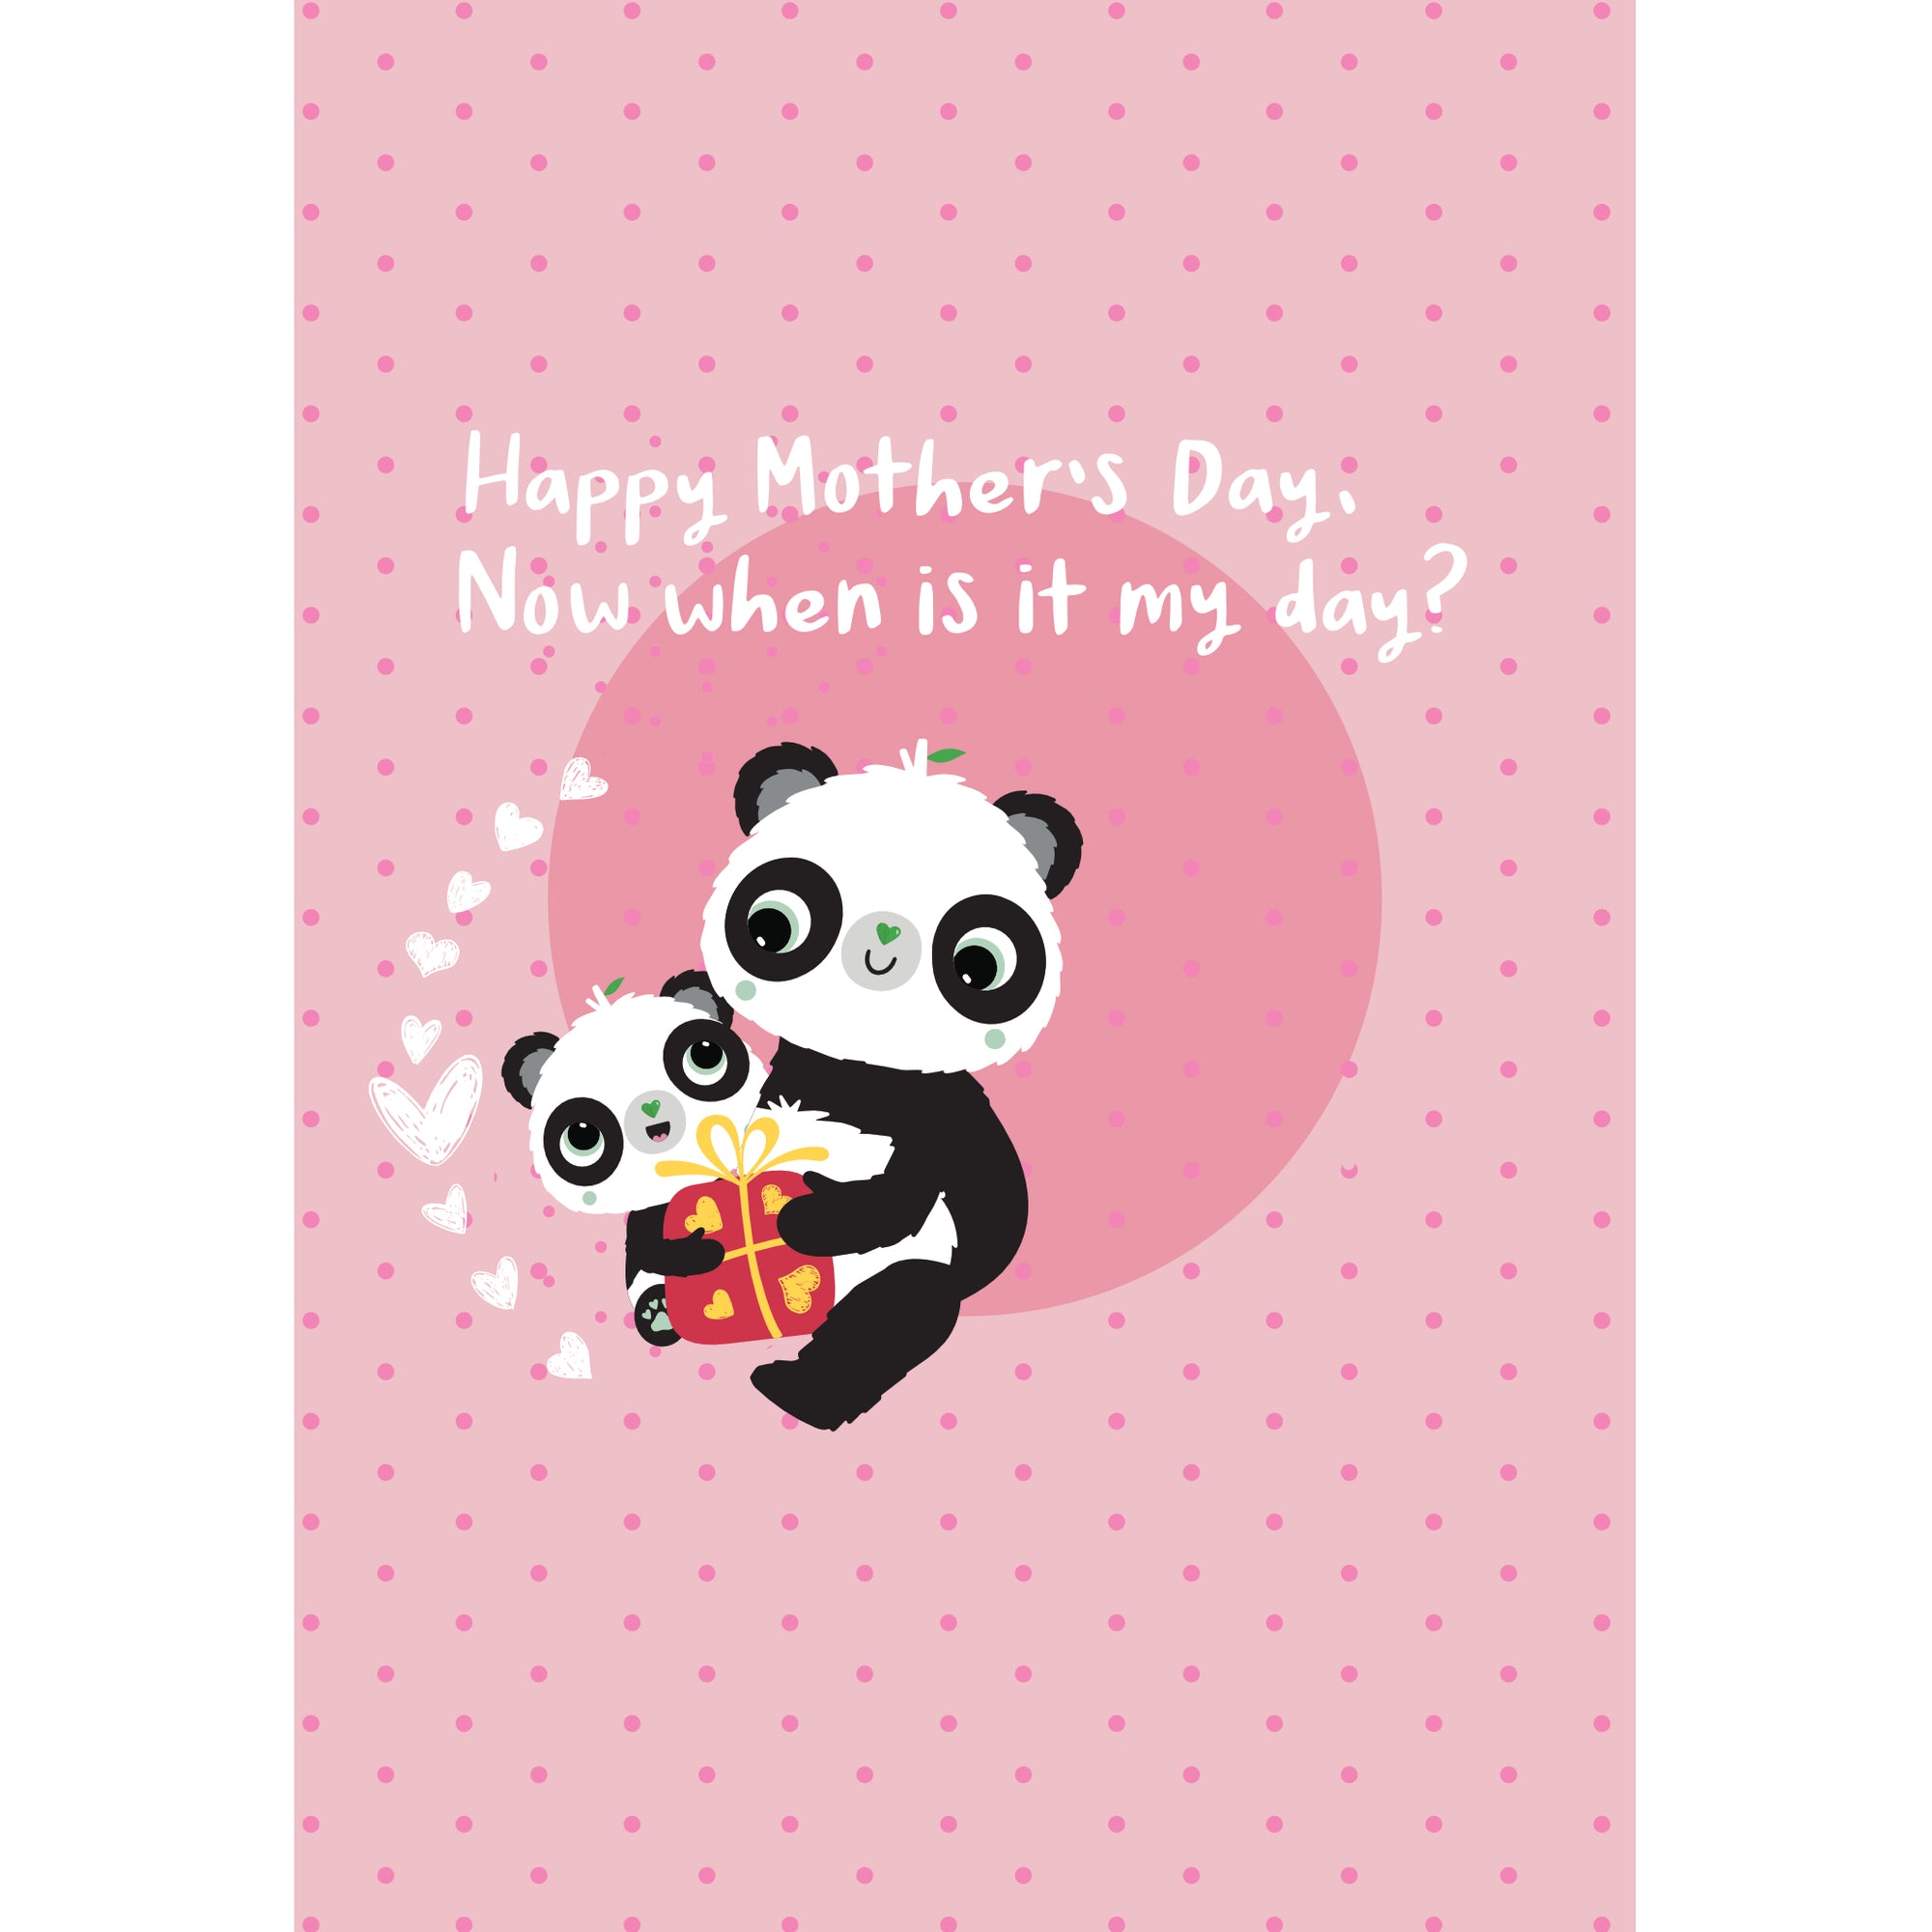 Now When Is It My Day? | A6 Eco Mother's Day Card | Panda Joy